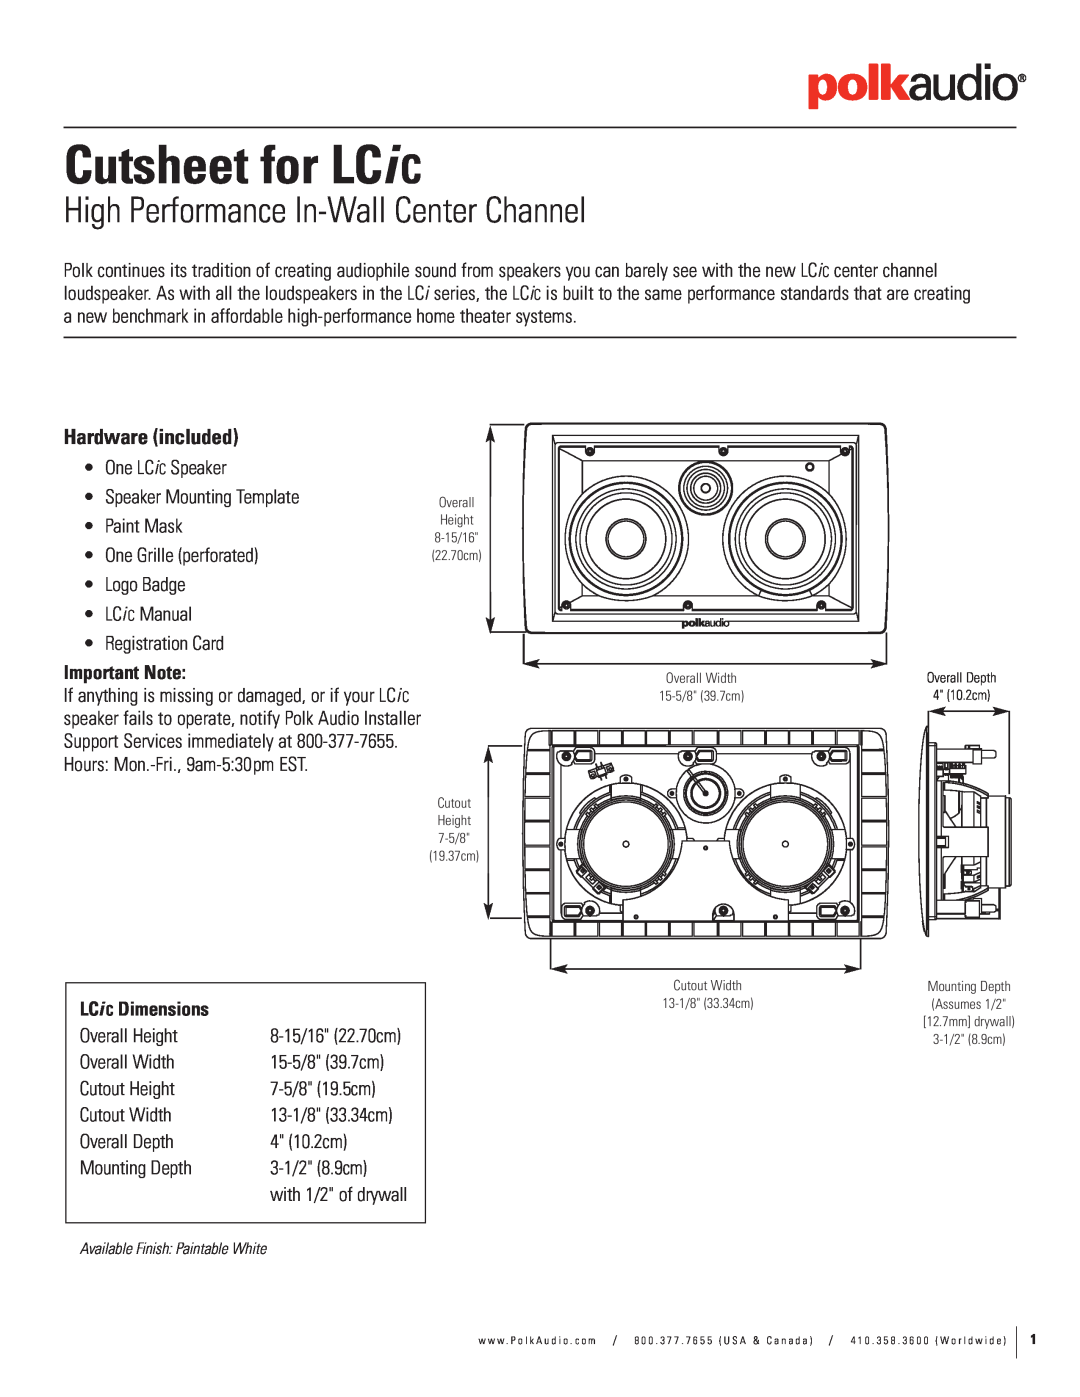 Polk Audio High Performance In-Wall Center Channel dimensions Important Note, LCi C Dimensions, Cutsheet for LCi C 